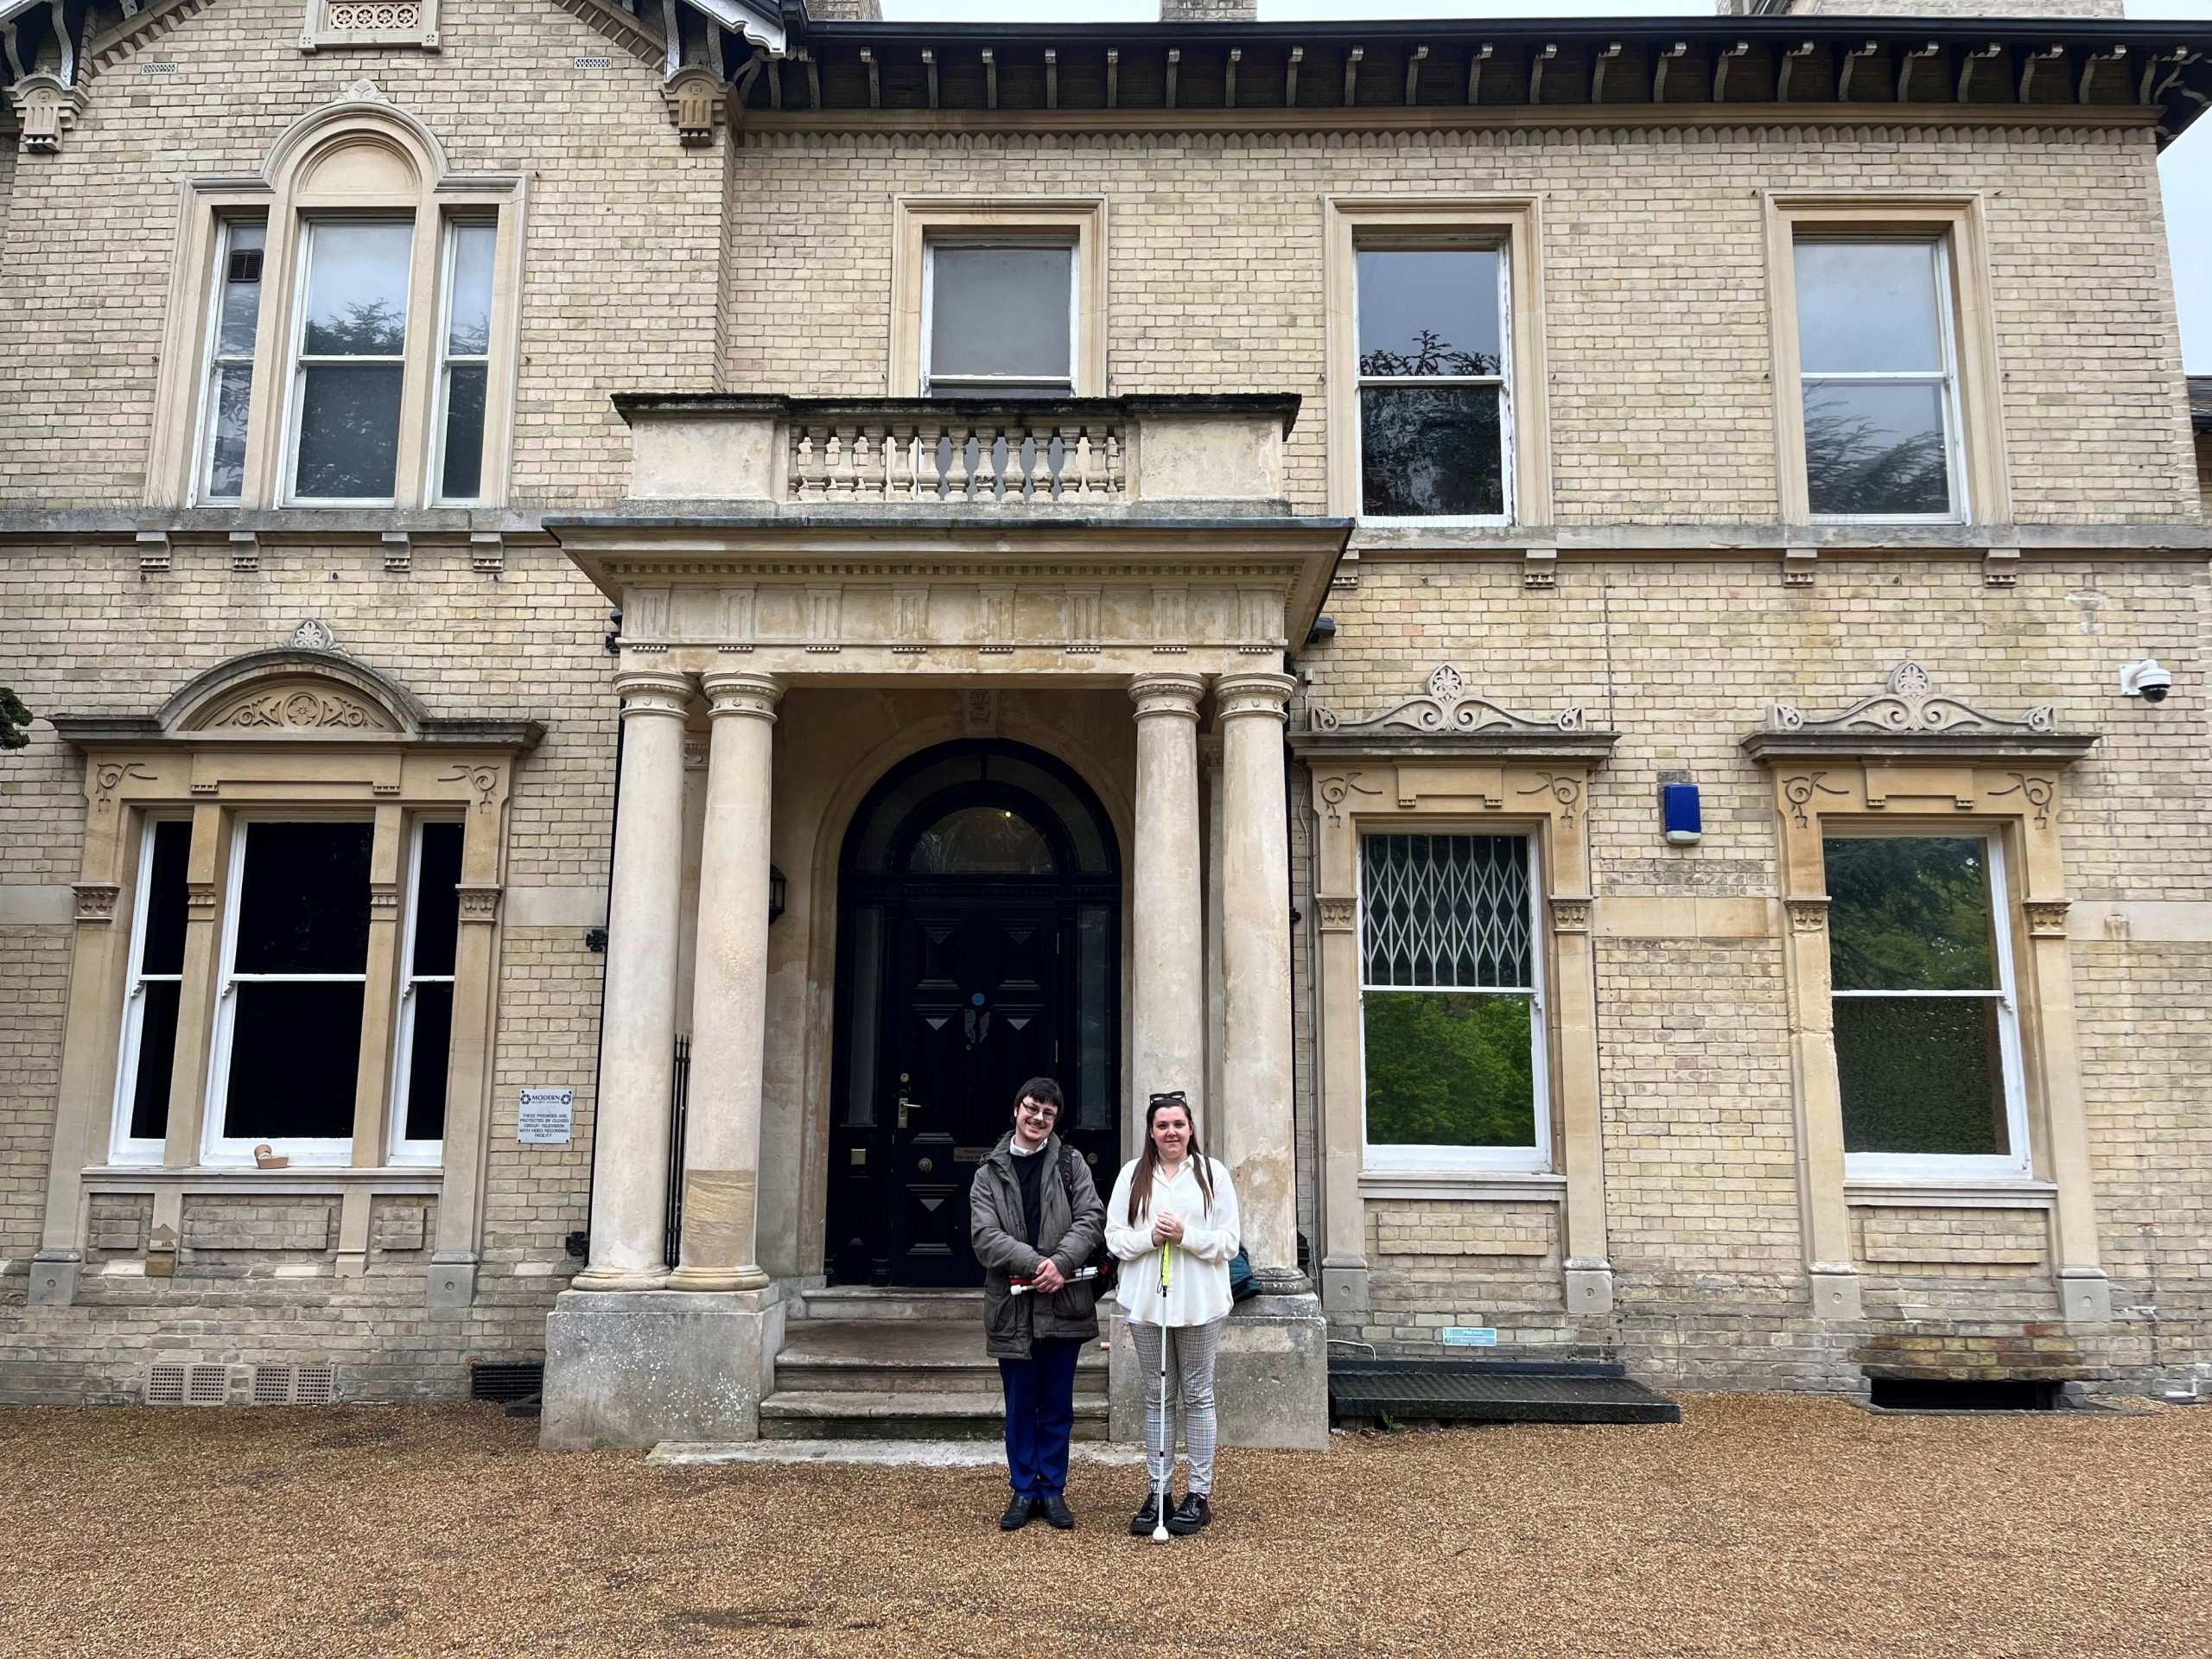 Alex, Essex SLC member, with Samantha Leftwich, Engagement Manager for East England. They are standing outside Chelmsford Museum, smiling at the camera.